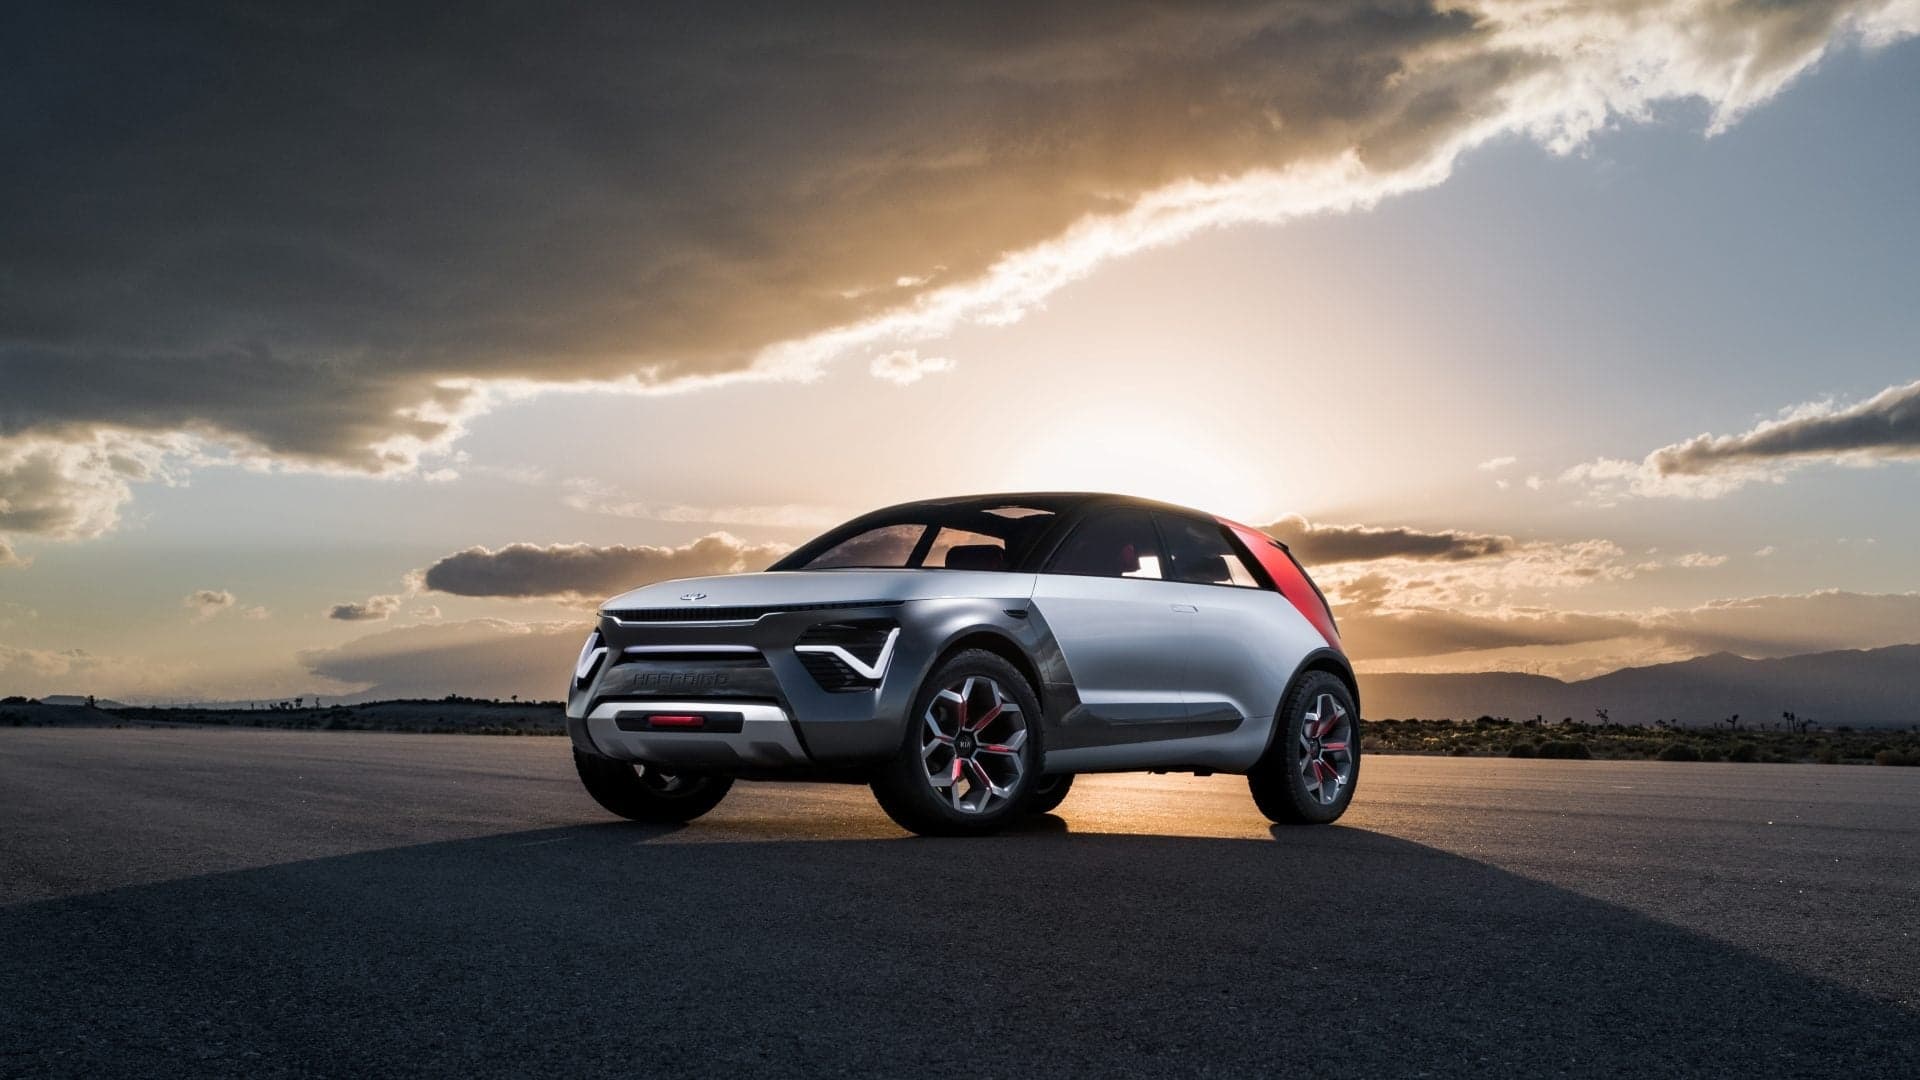 Kia HabaNiro Concept Is a Spicy, Self-Driving EV That’s Confused About Its Own Existence